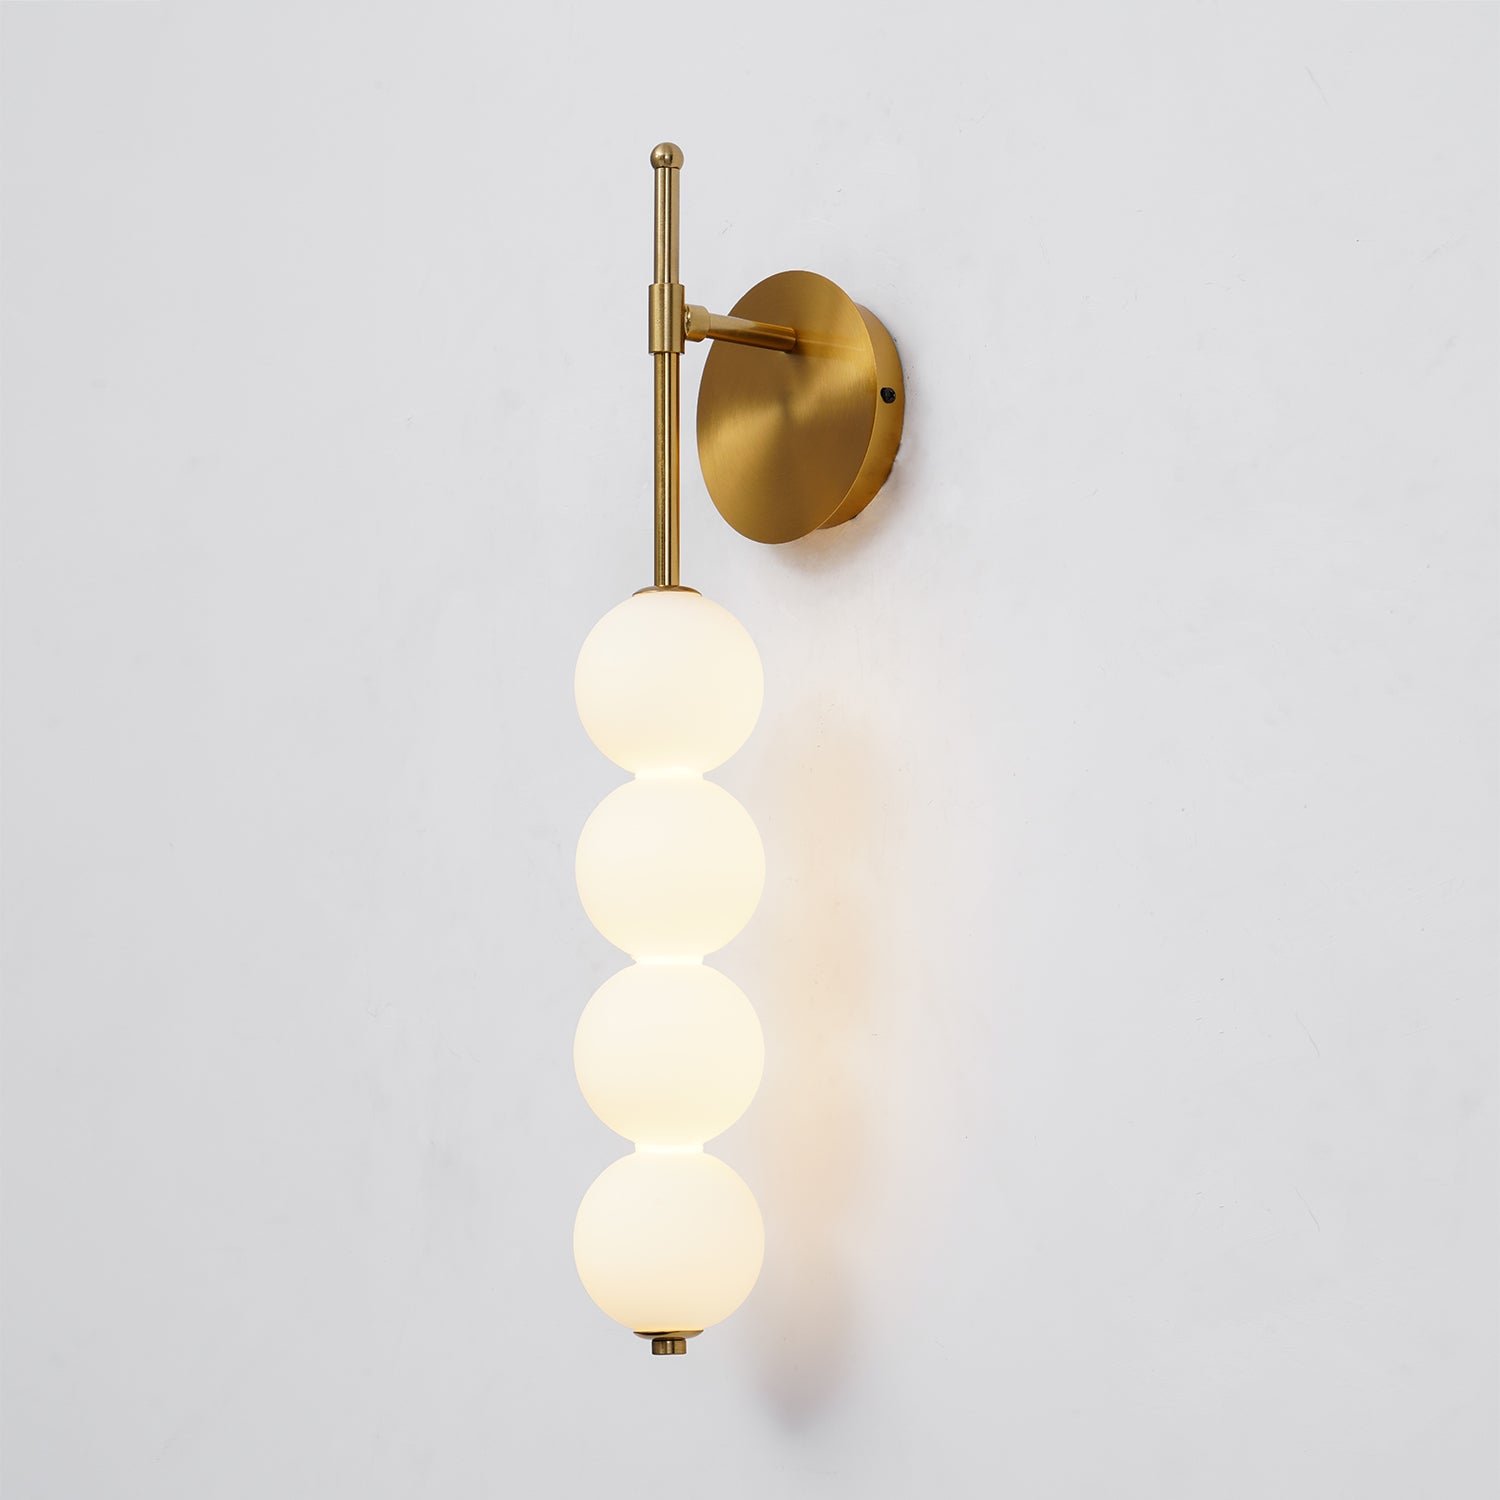 Abacus Wall Lamp - Gold and White, Cool White Light, 3.1 inches Diameter x 20.9 inches Height (8cm x 53cm)